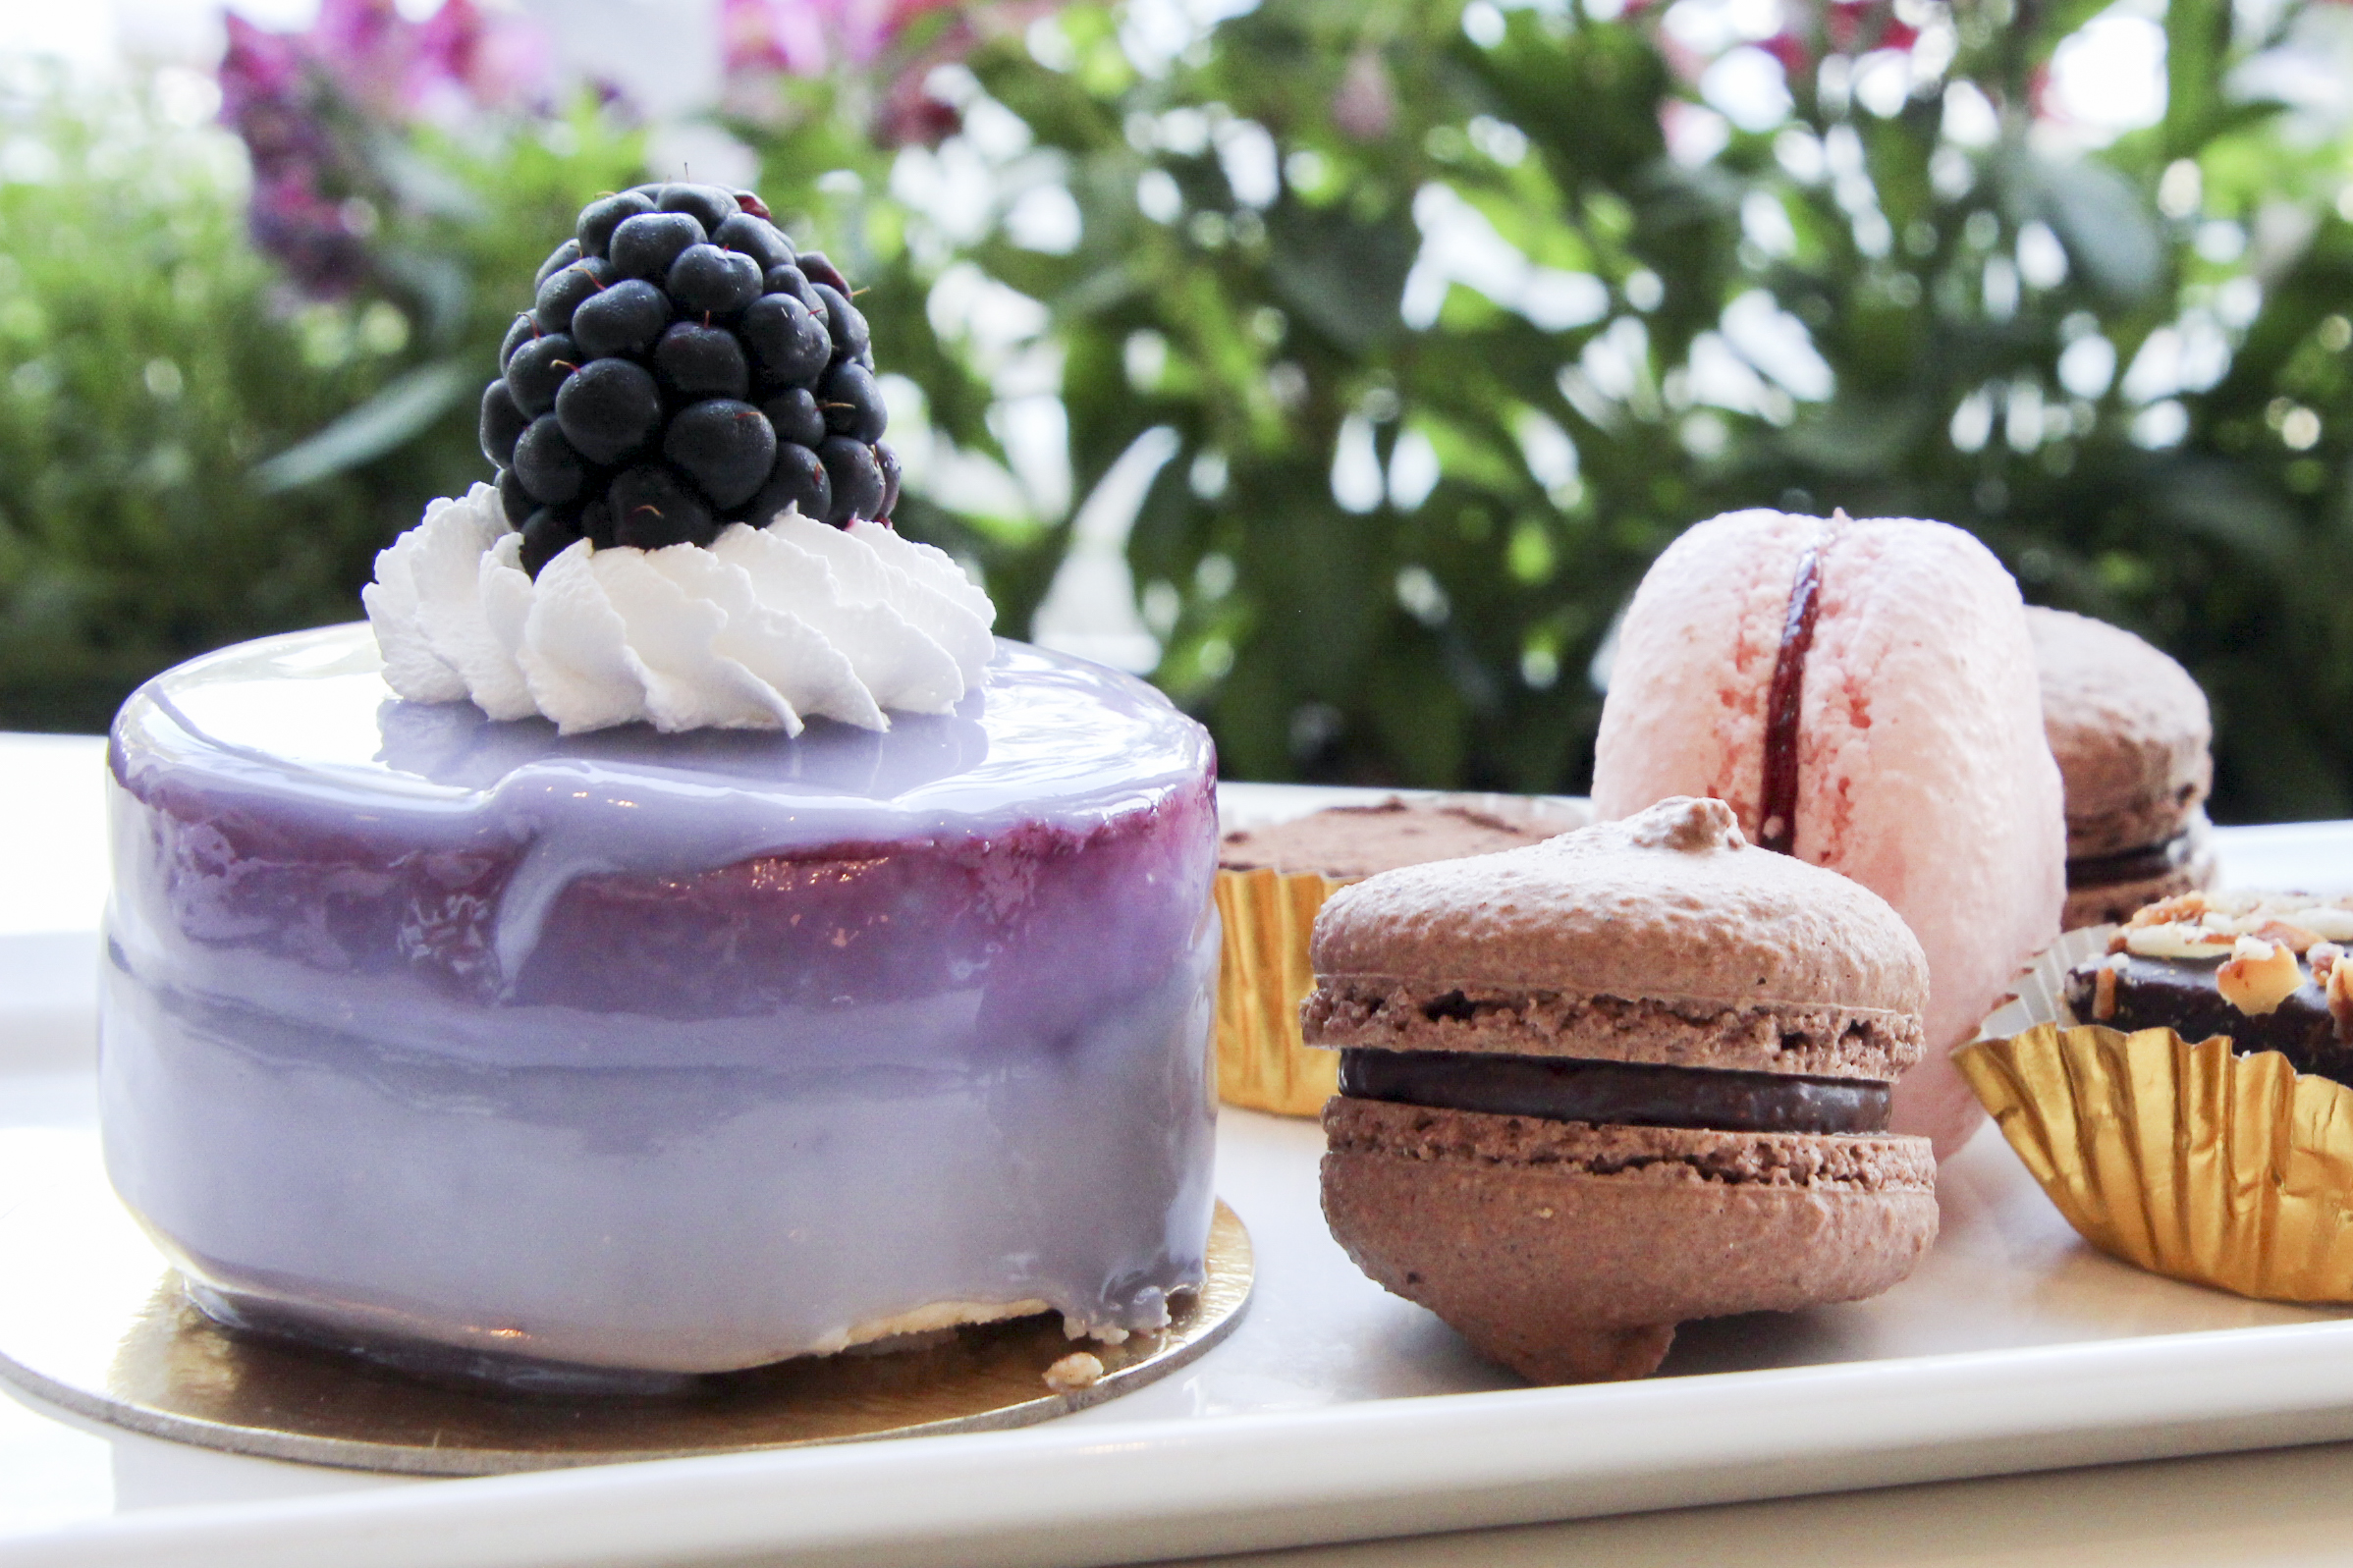 The Cassis Mousse Cake, Chocolate and Raspberry Macarons